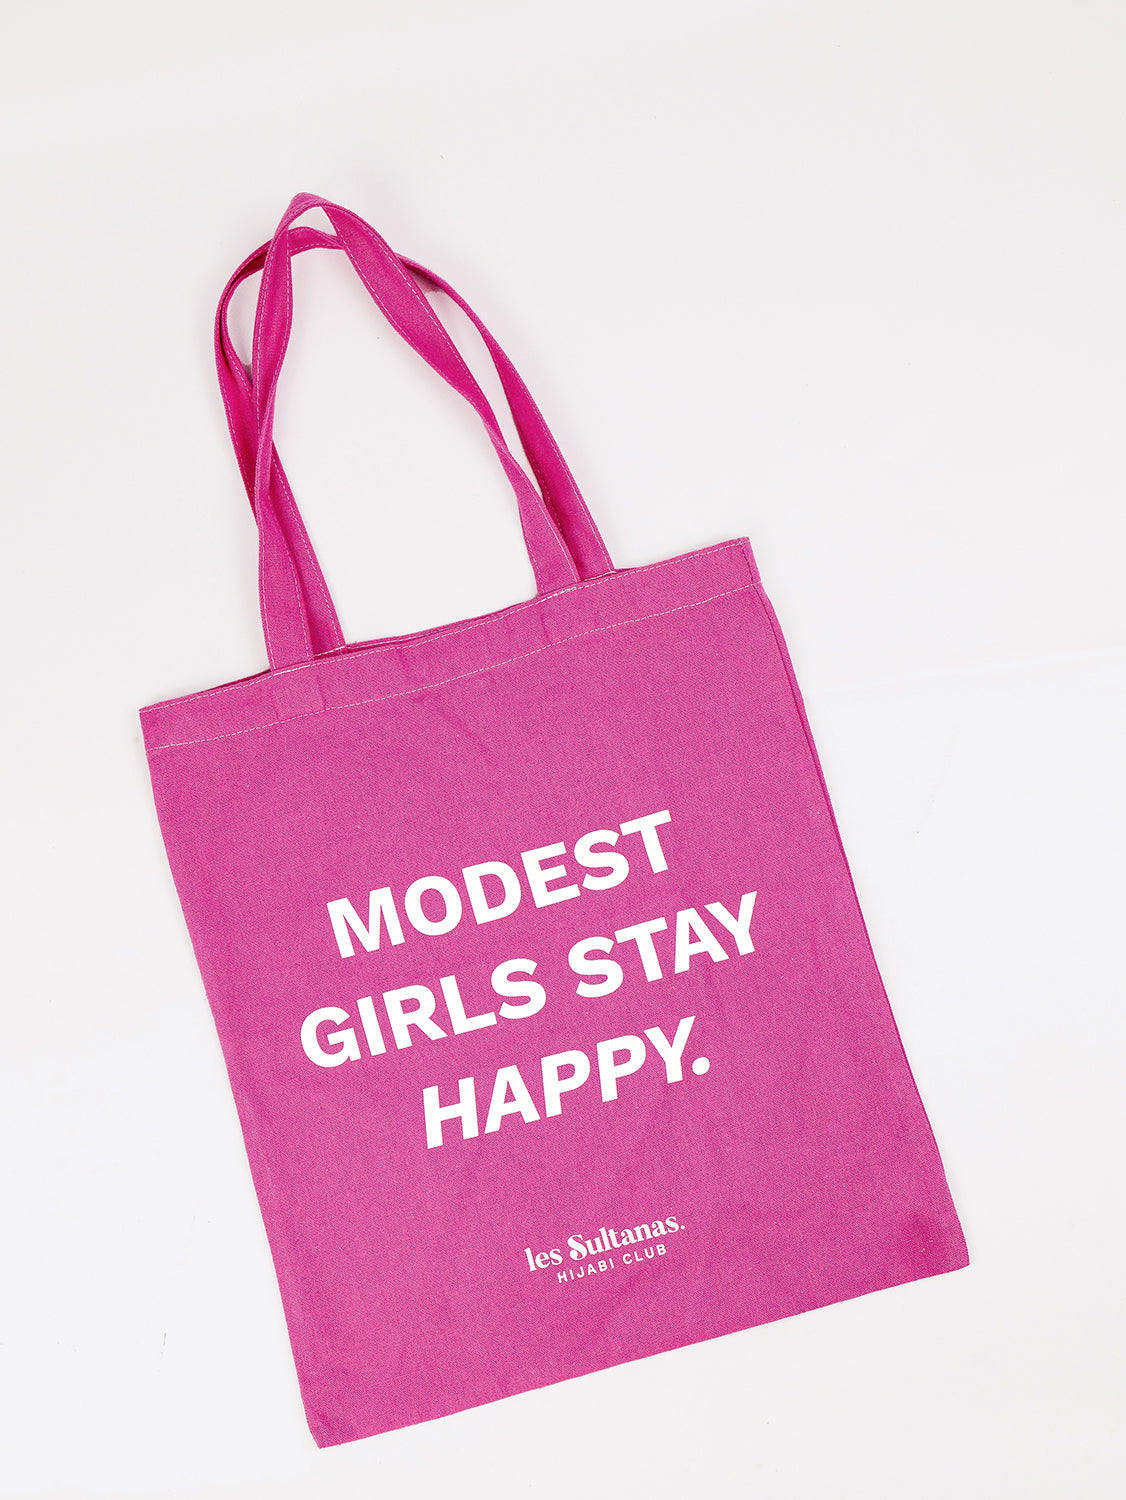 Cotton Tote Bag "Modest Girls" Hot Pink